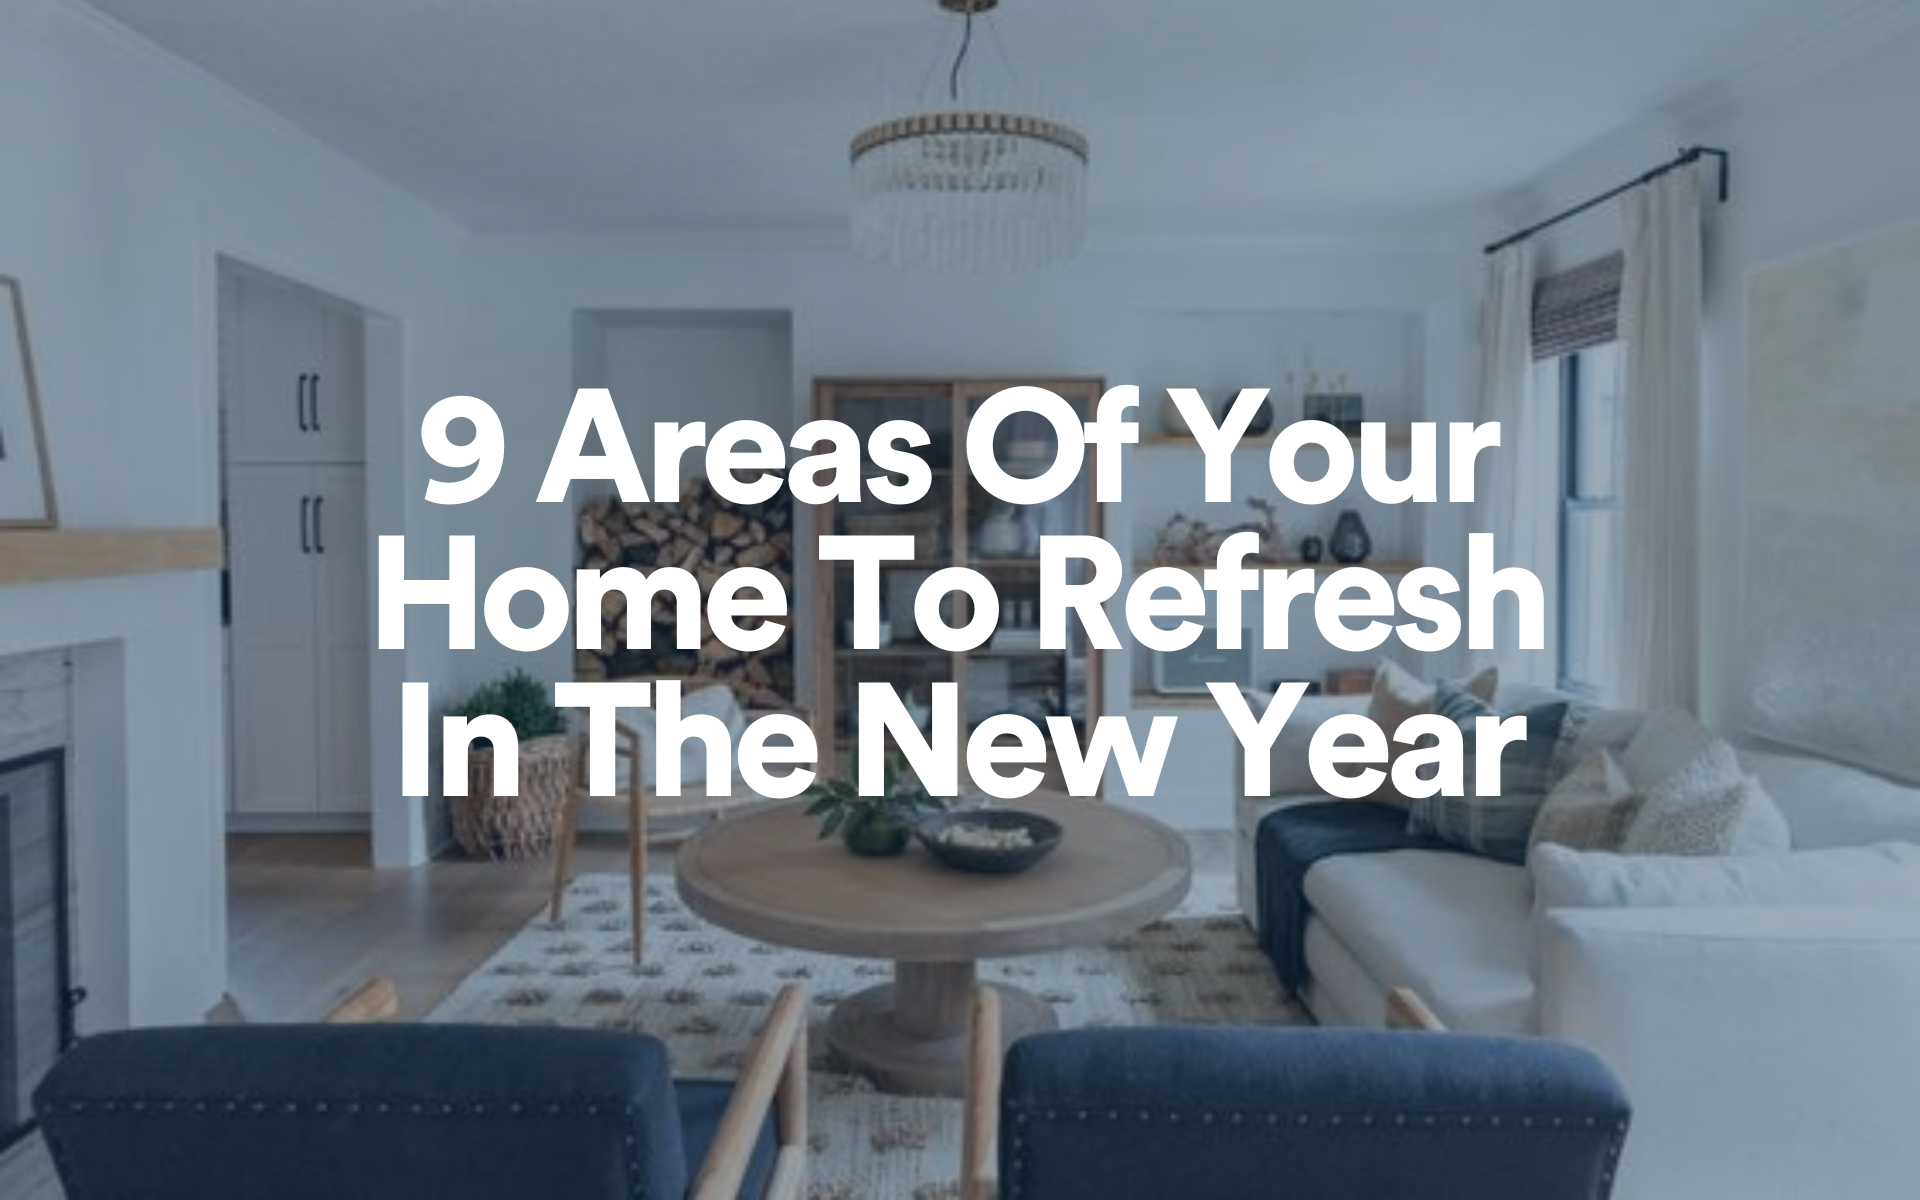 Nine areas of your home to refresh in the new year